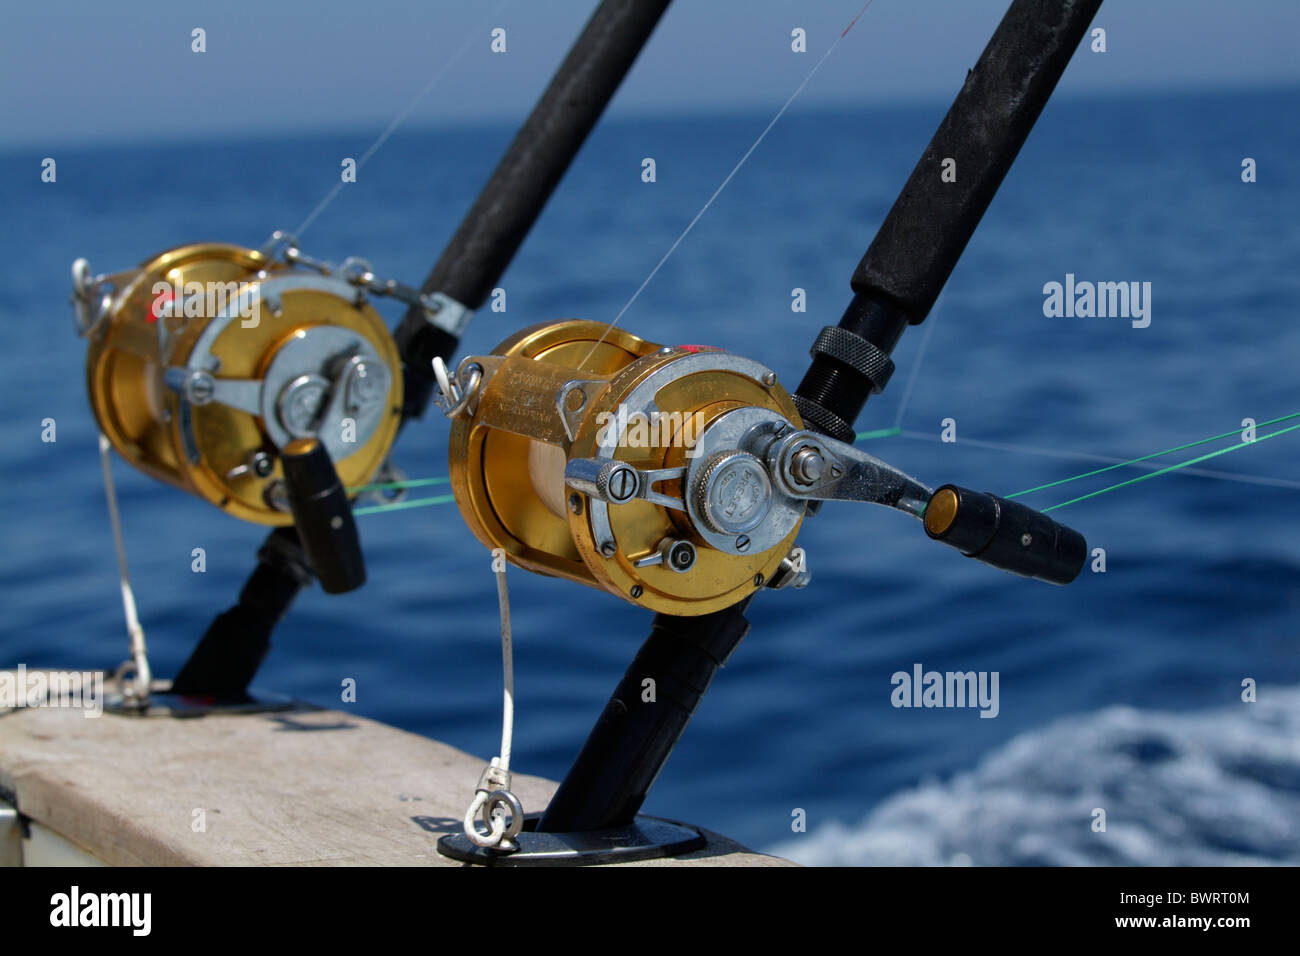 Two fishing rods and reels on board a game fishing boat in the Mediterranean Sea, France. Stock Photo